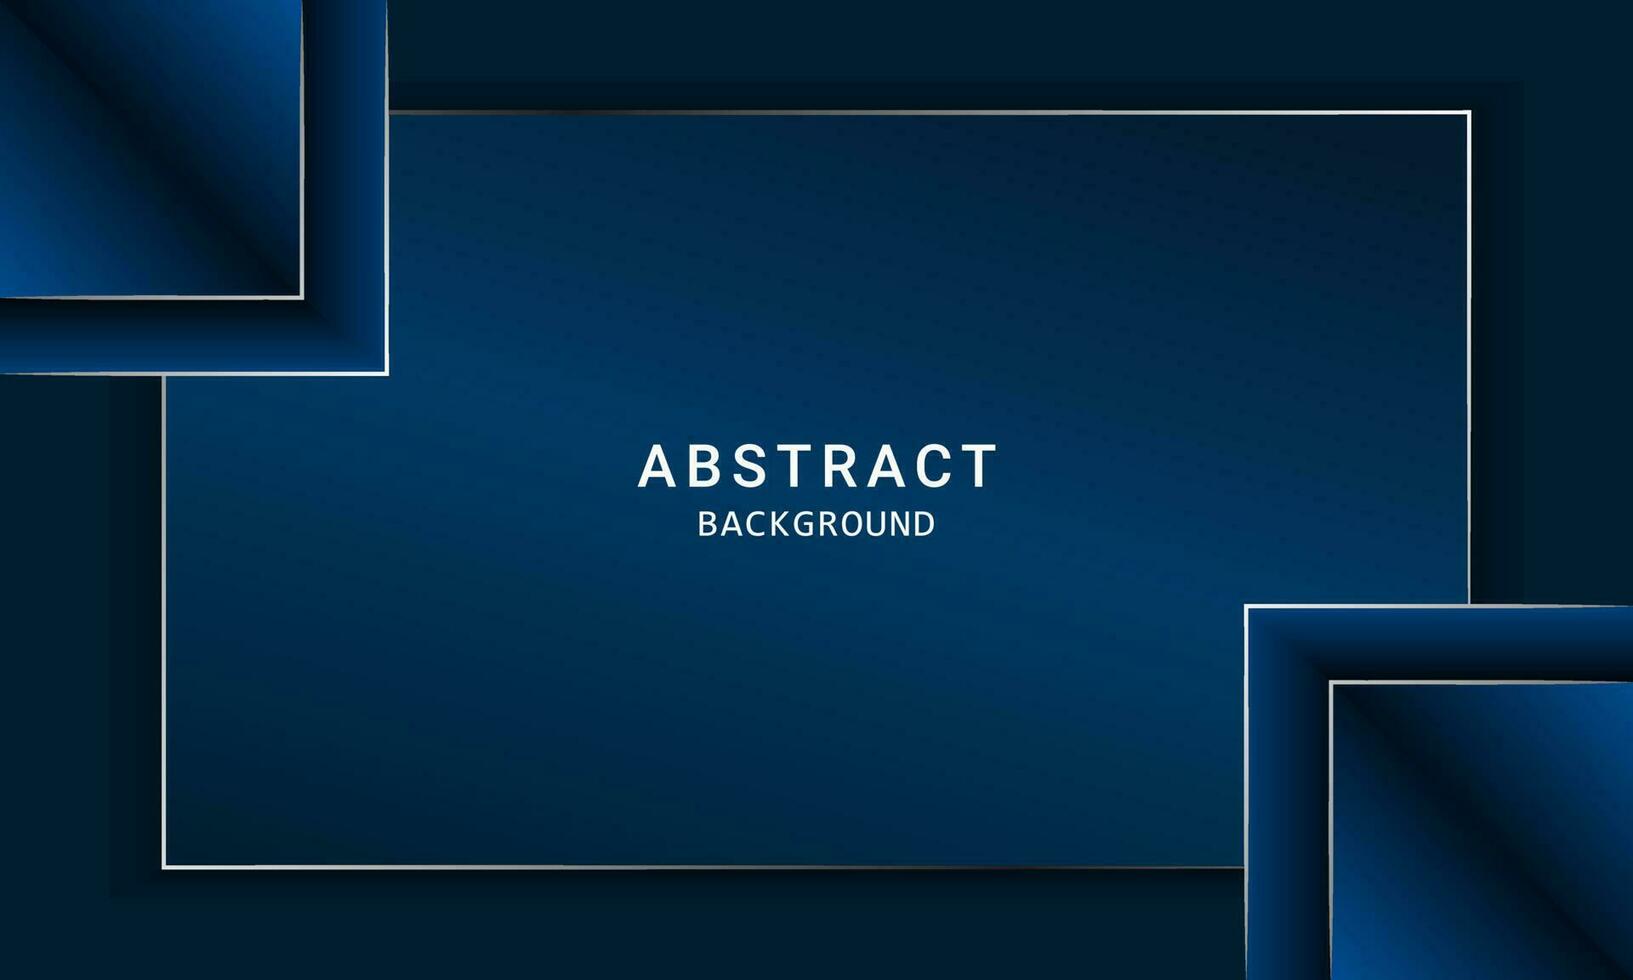 Blue abstract background for social media design vector